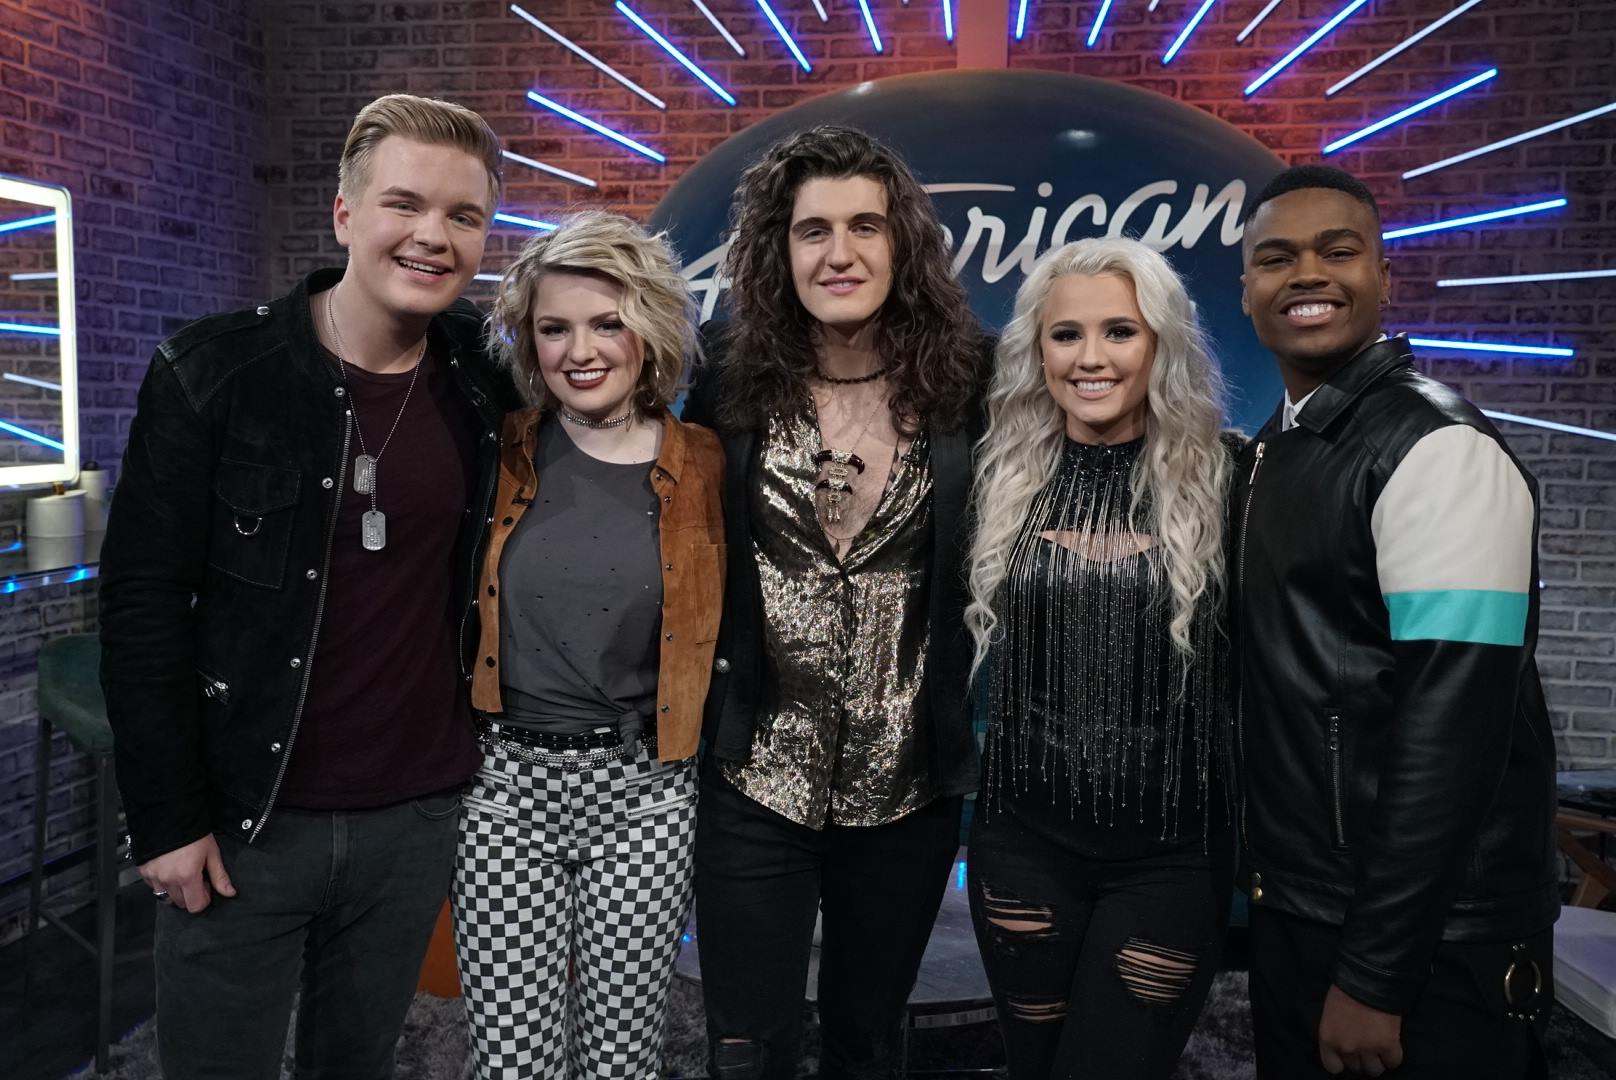 Gabby Barrett and the Top 5 backstage at American Idol on May 6, 2018.
Photo credit: American Idol
